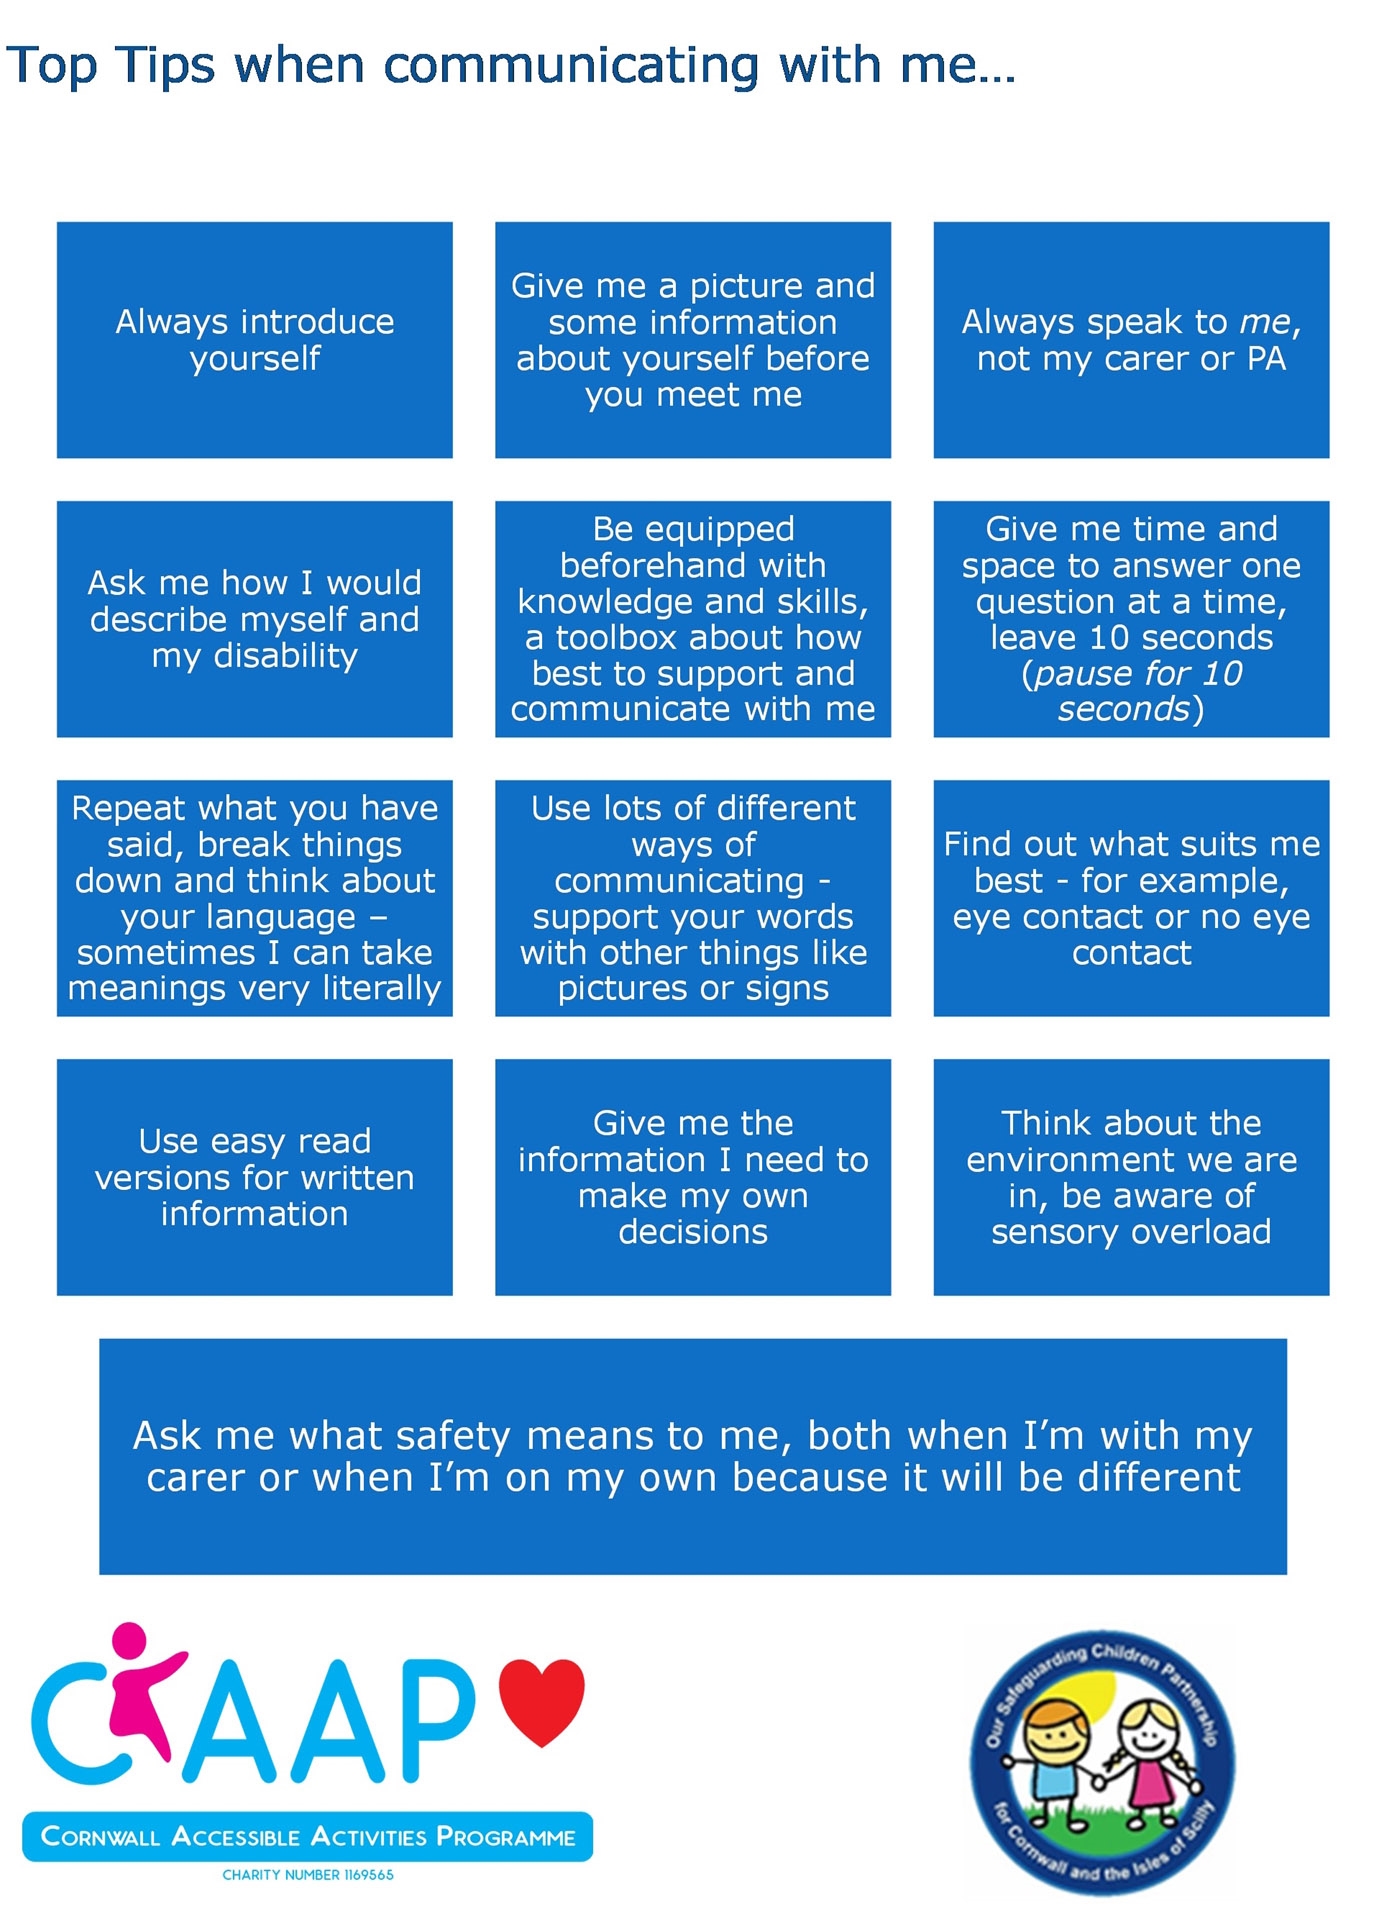 top tips from children and young people on how to communicate with them